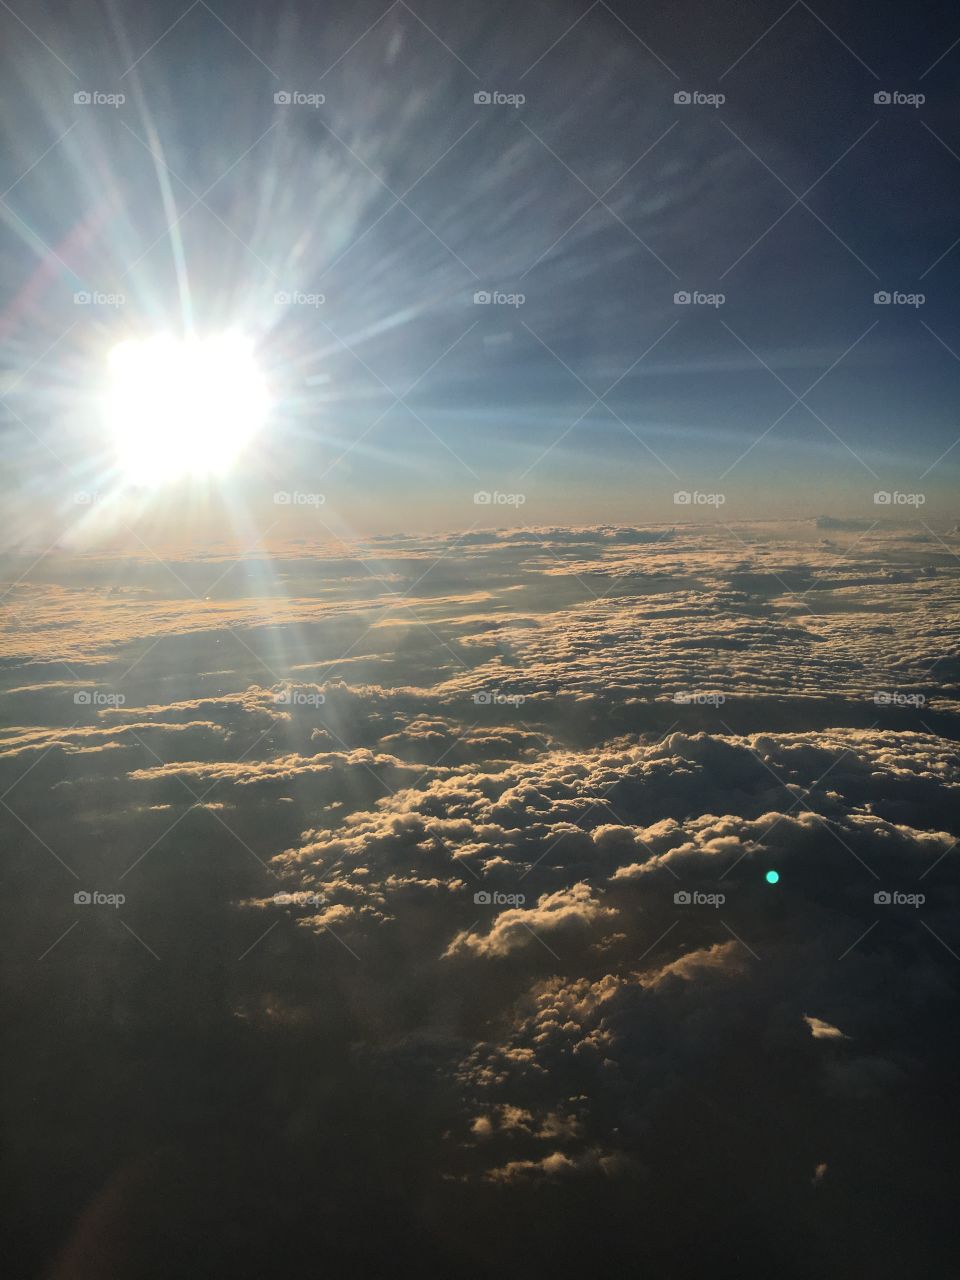 Nothing but puffy clouds and sunny skies from 30,000 feet.